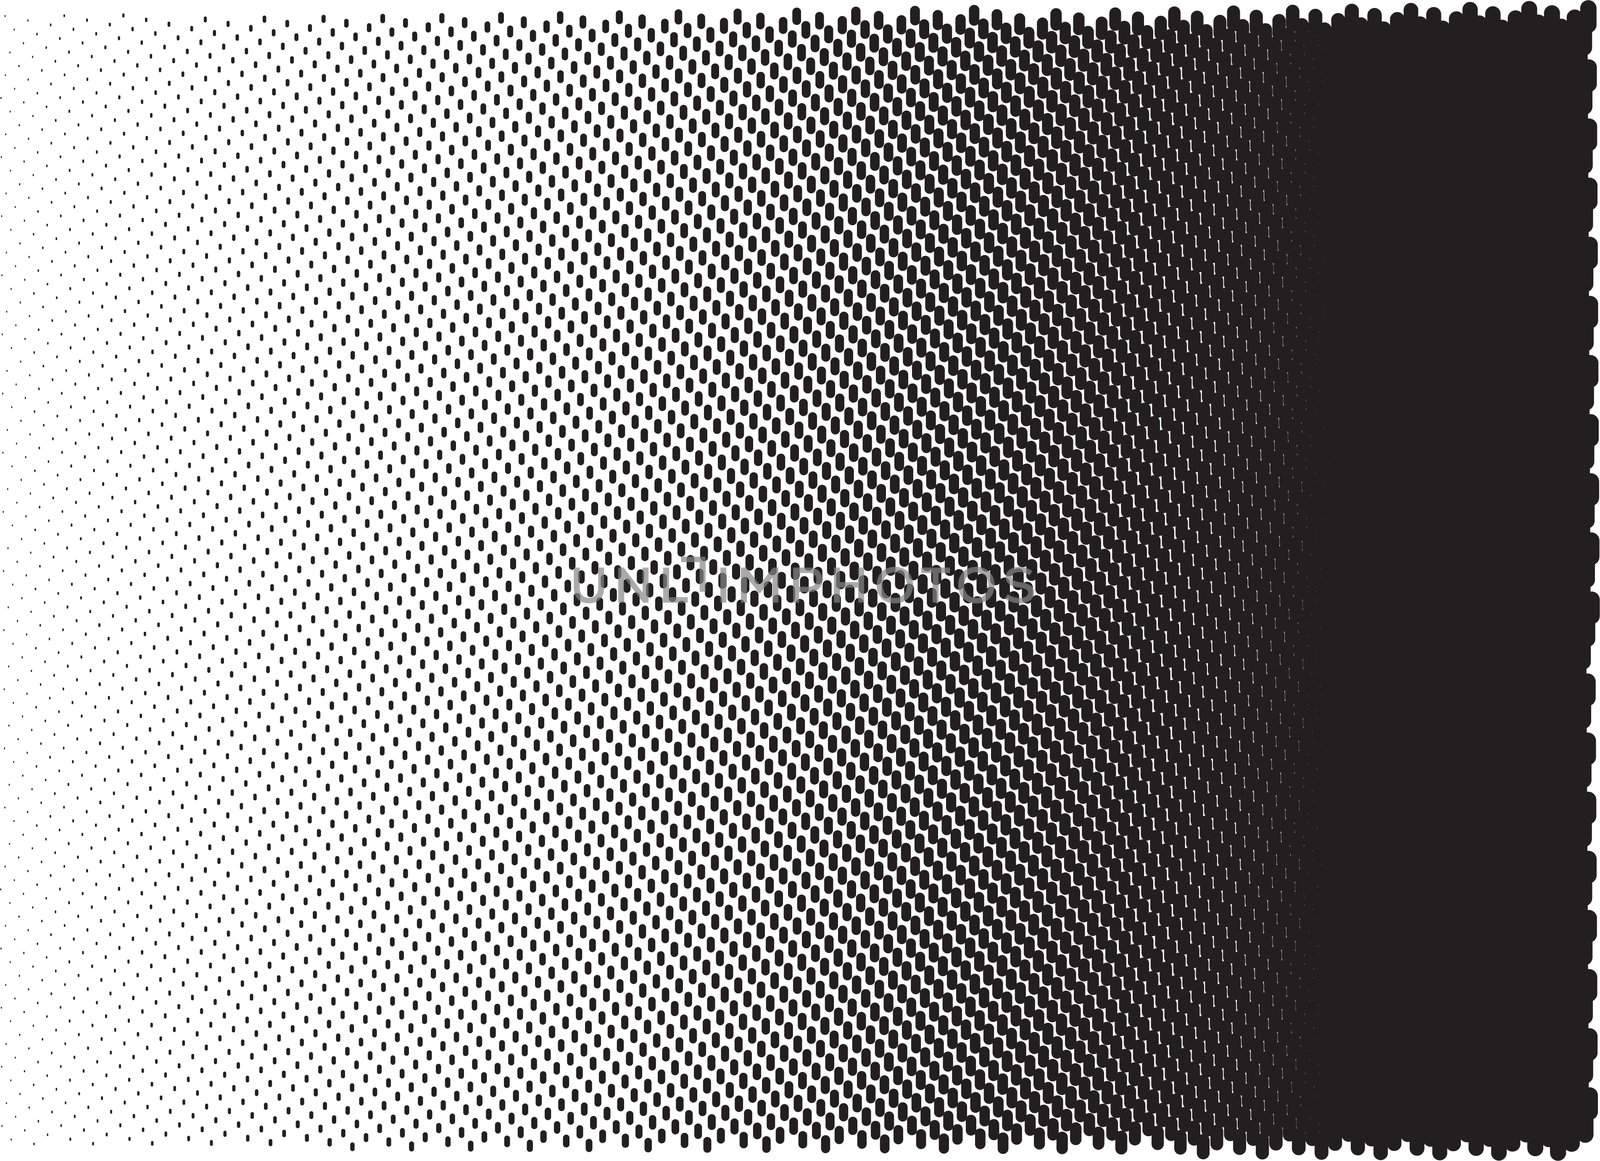 Halftone by jeremywhat